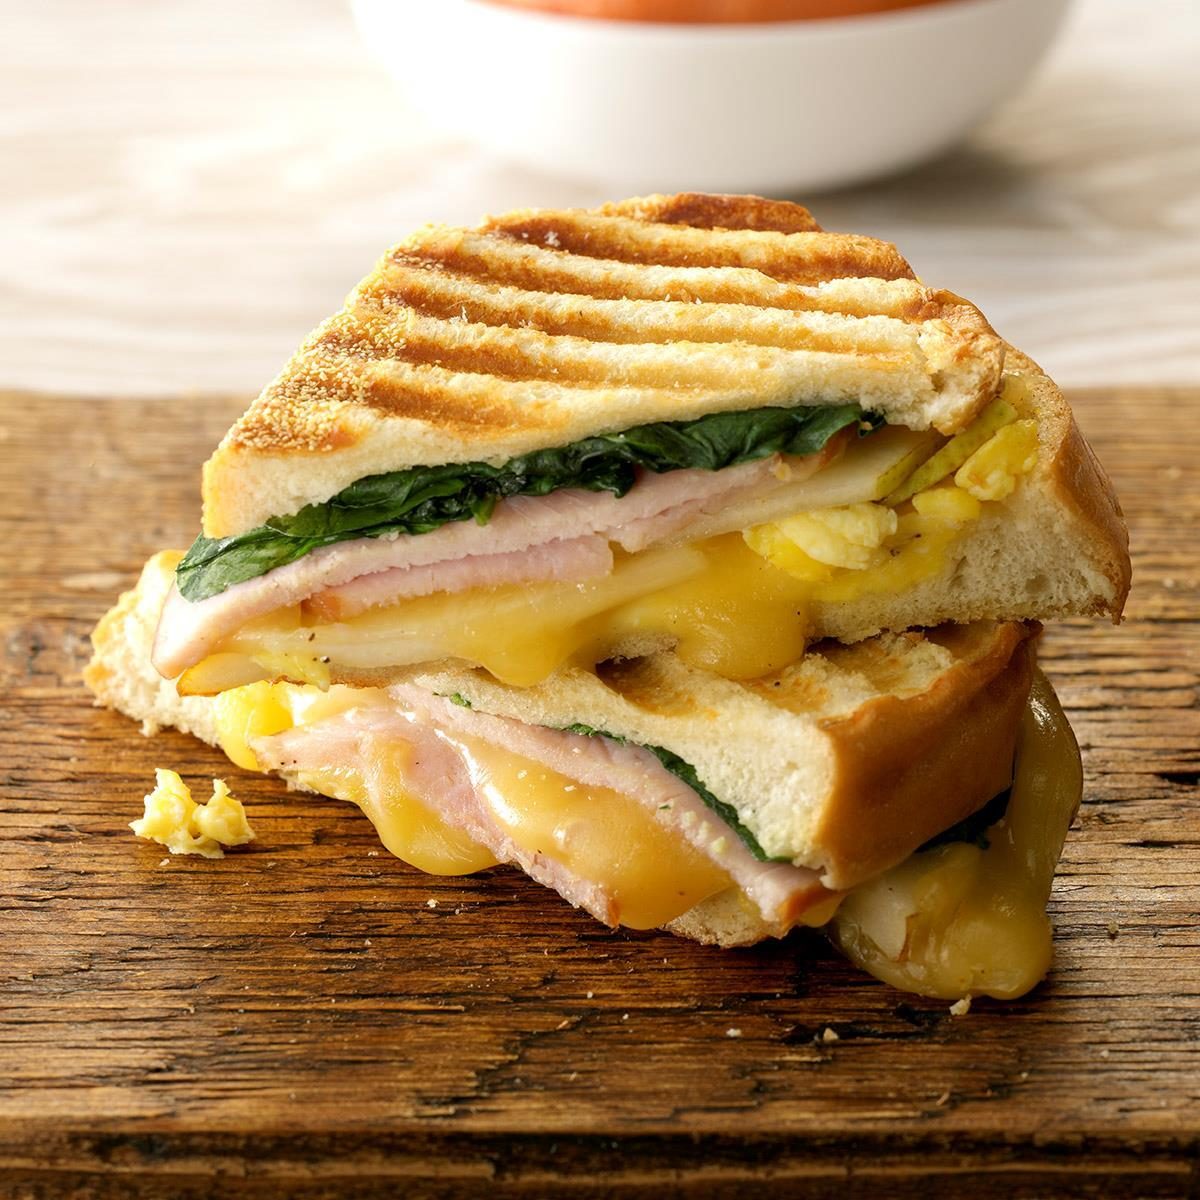 Grilled Bistro Breakfast Sandwiches Recipe: How to Make It